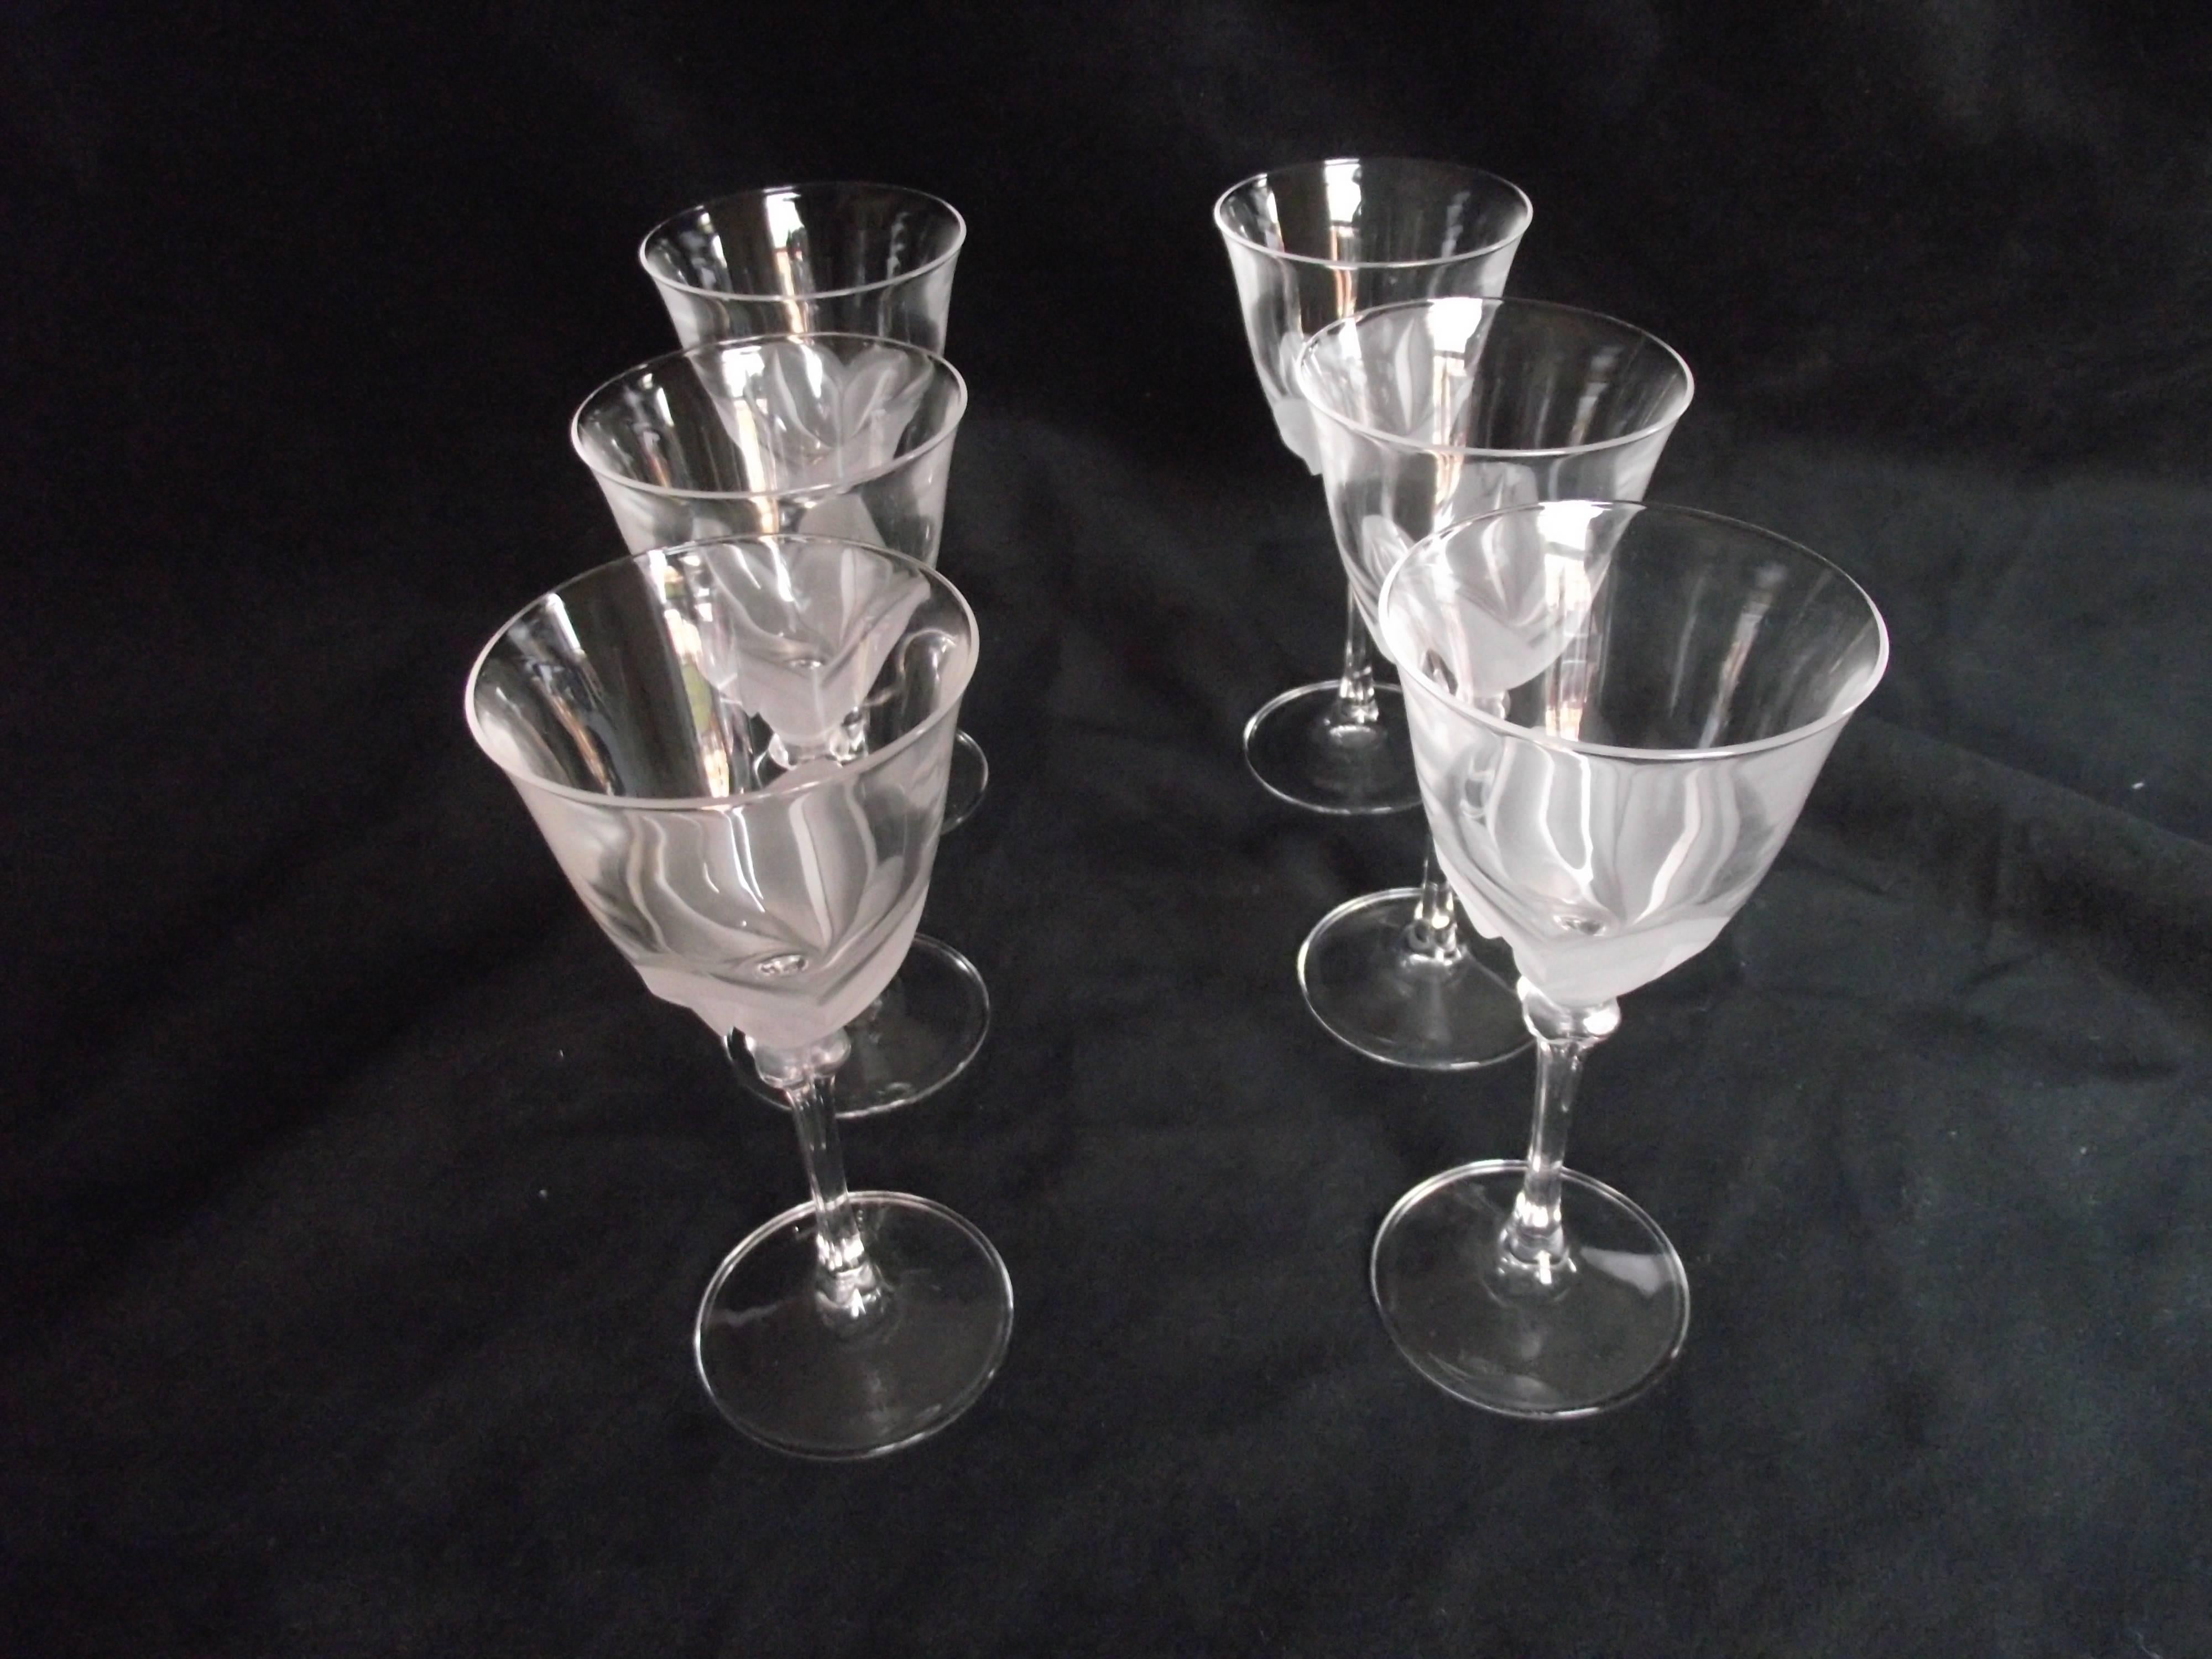 Very interesting clear and frosted glass patterned set of six wine glasses. They are by J. G. Durand and are in excellent condition. Signed on the bottom of each stem.